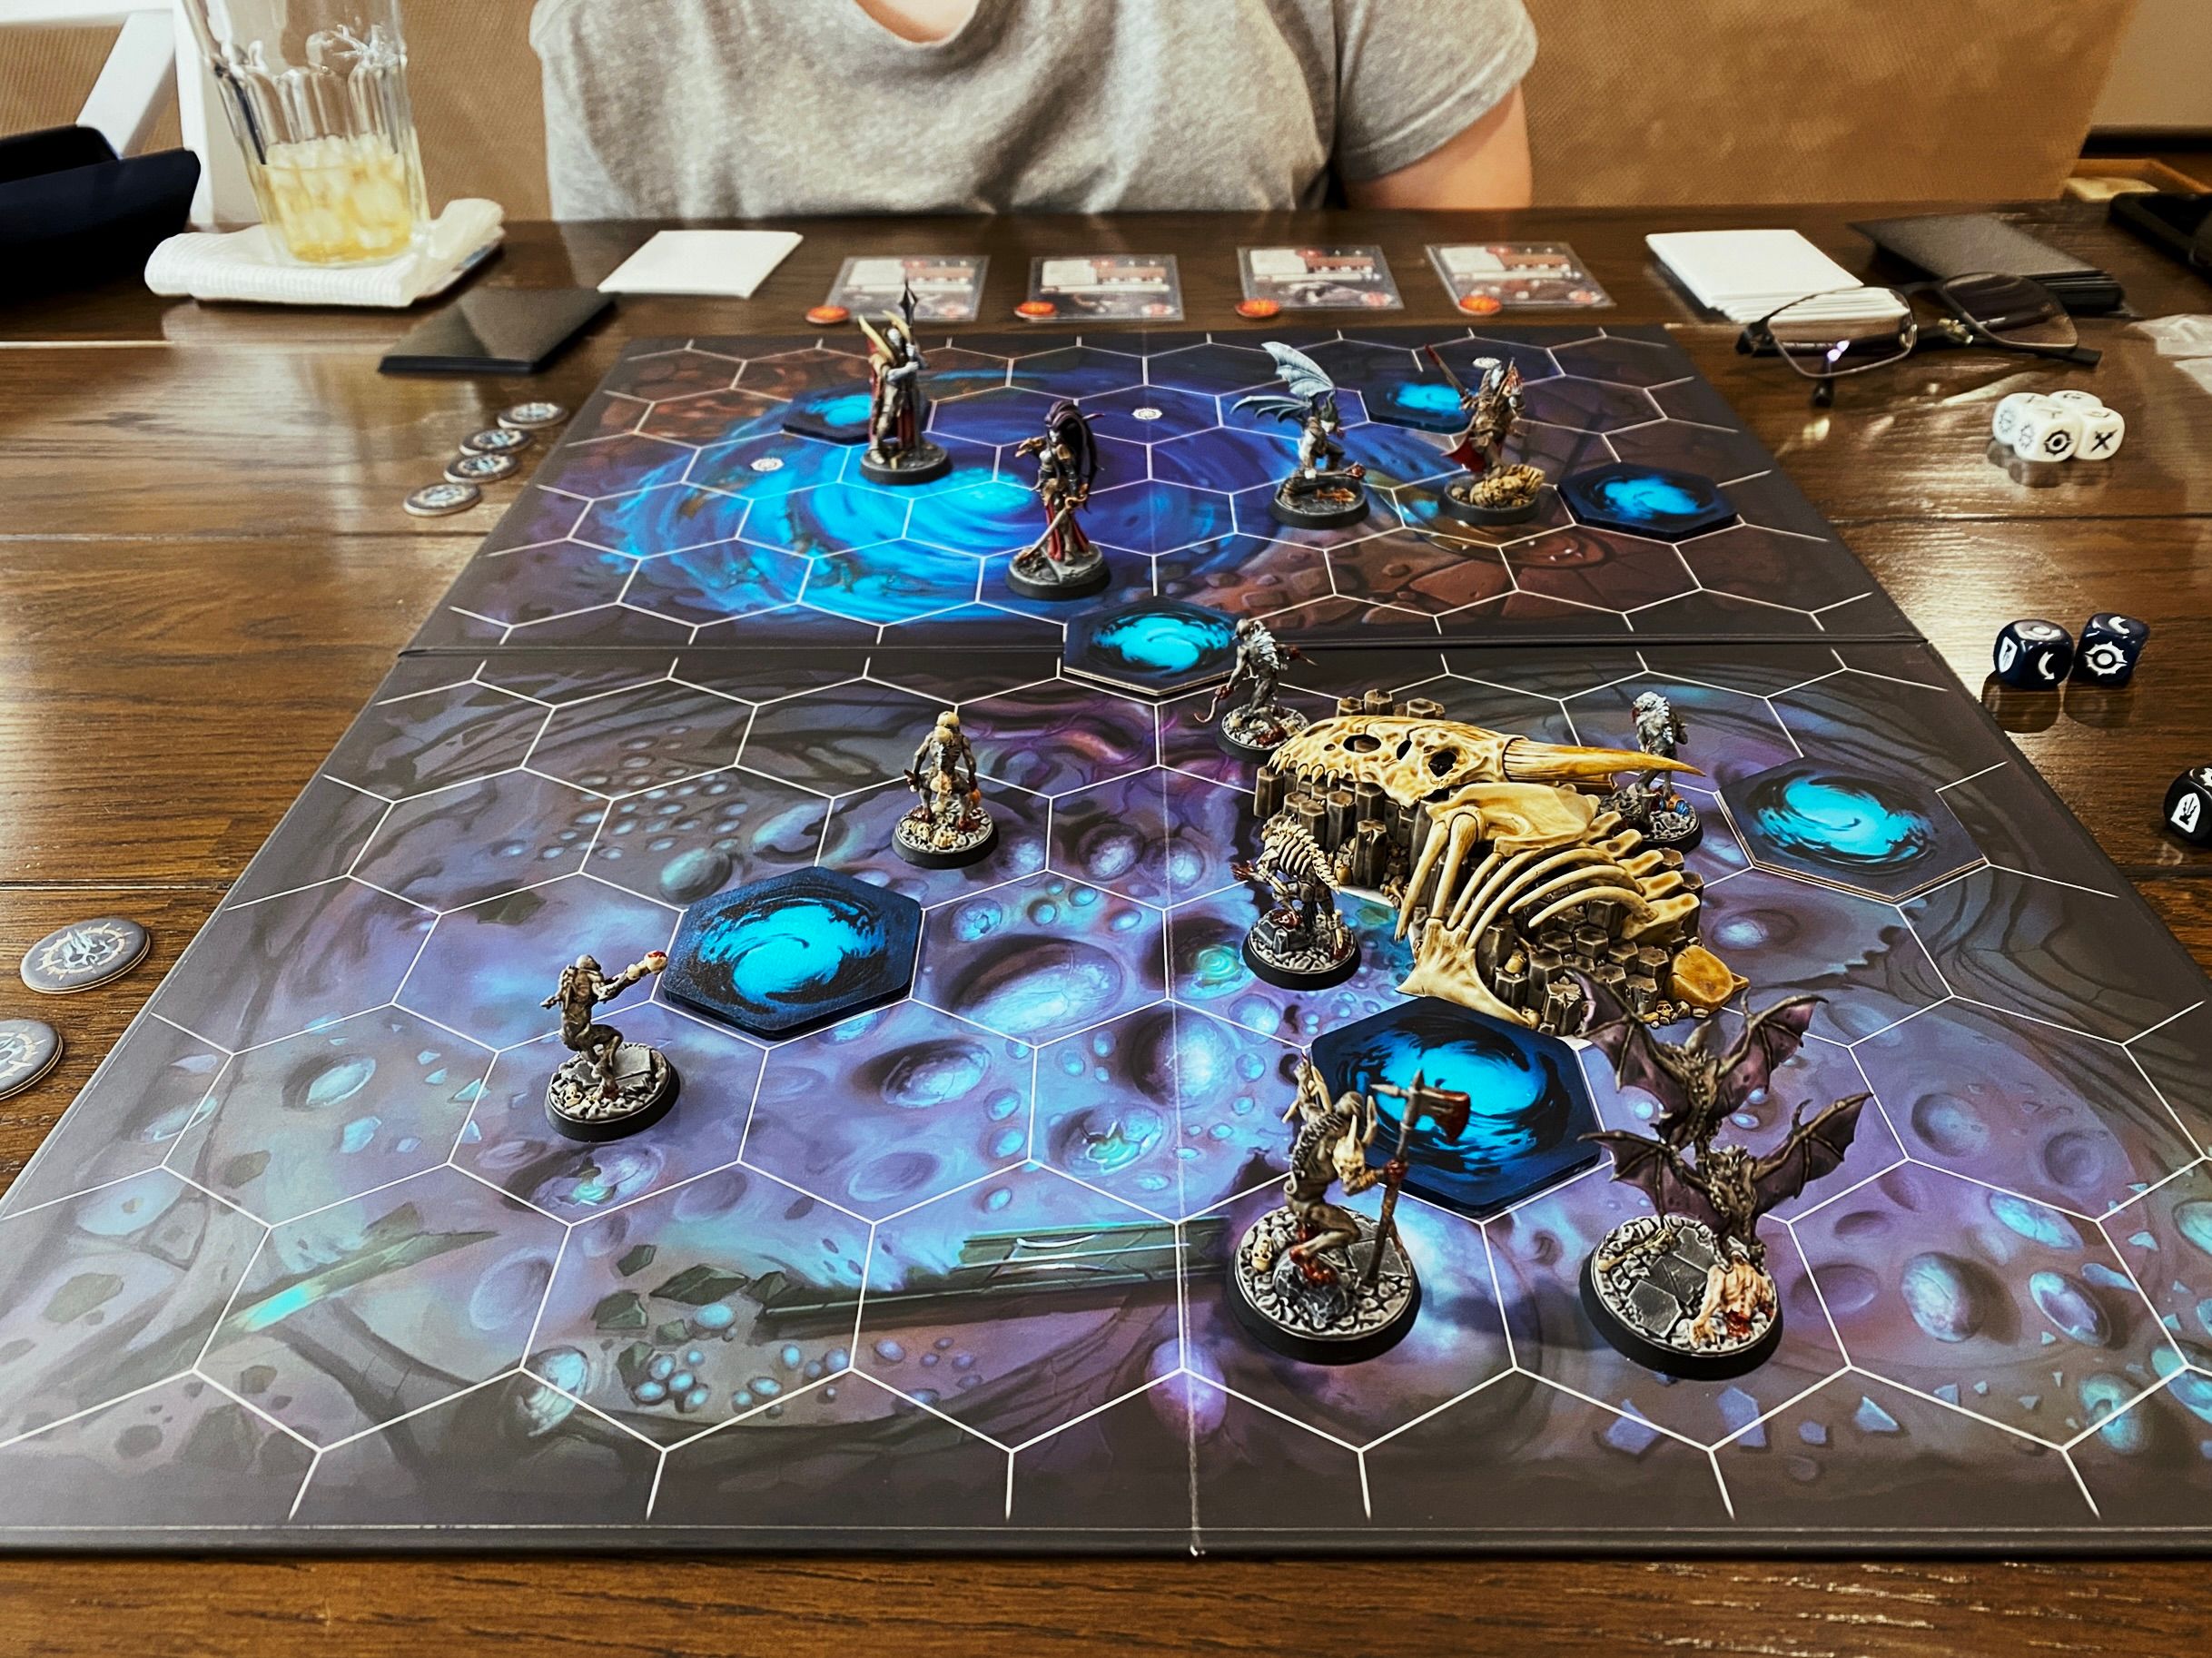 A photo of the board of Warhammer Underworlds. The board is hex-tiled and the art looks like it's in a sea cave or some underwater cavern. The two warbands are the Crimson Court (elegant vampires) and the Grymwatch (flesh-eating ghouls).